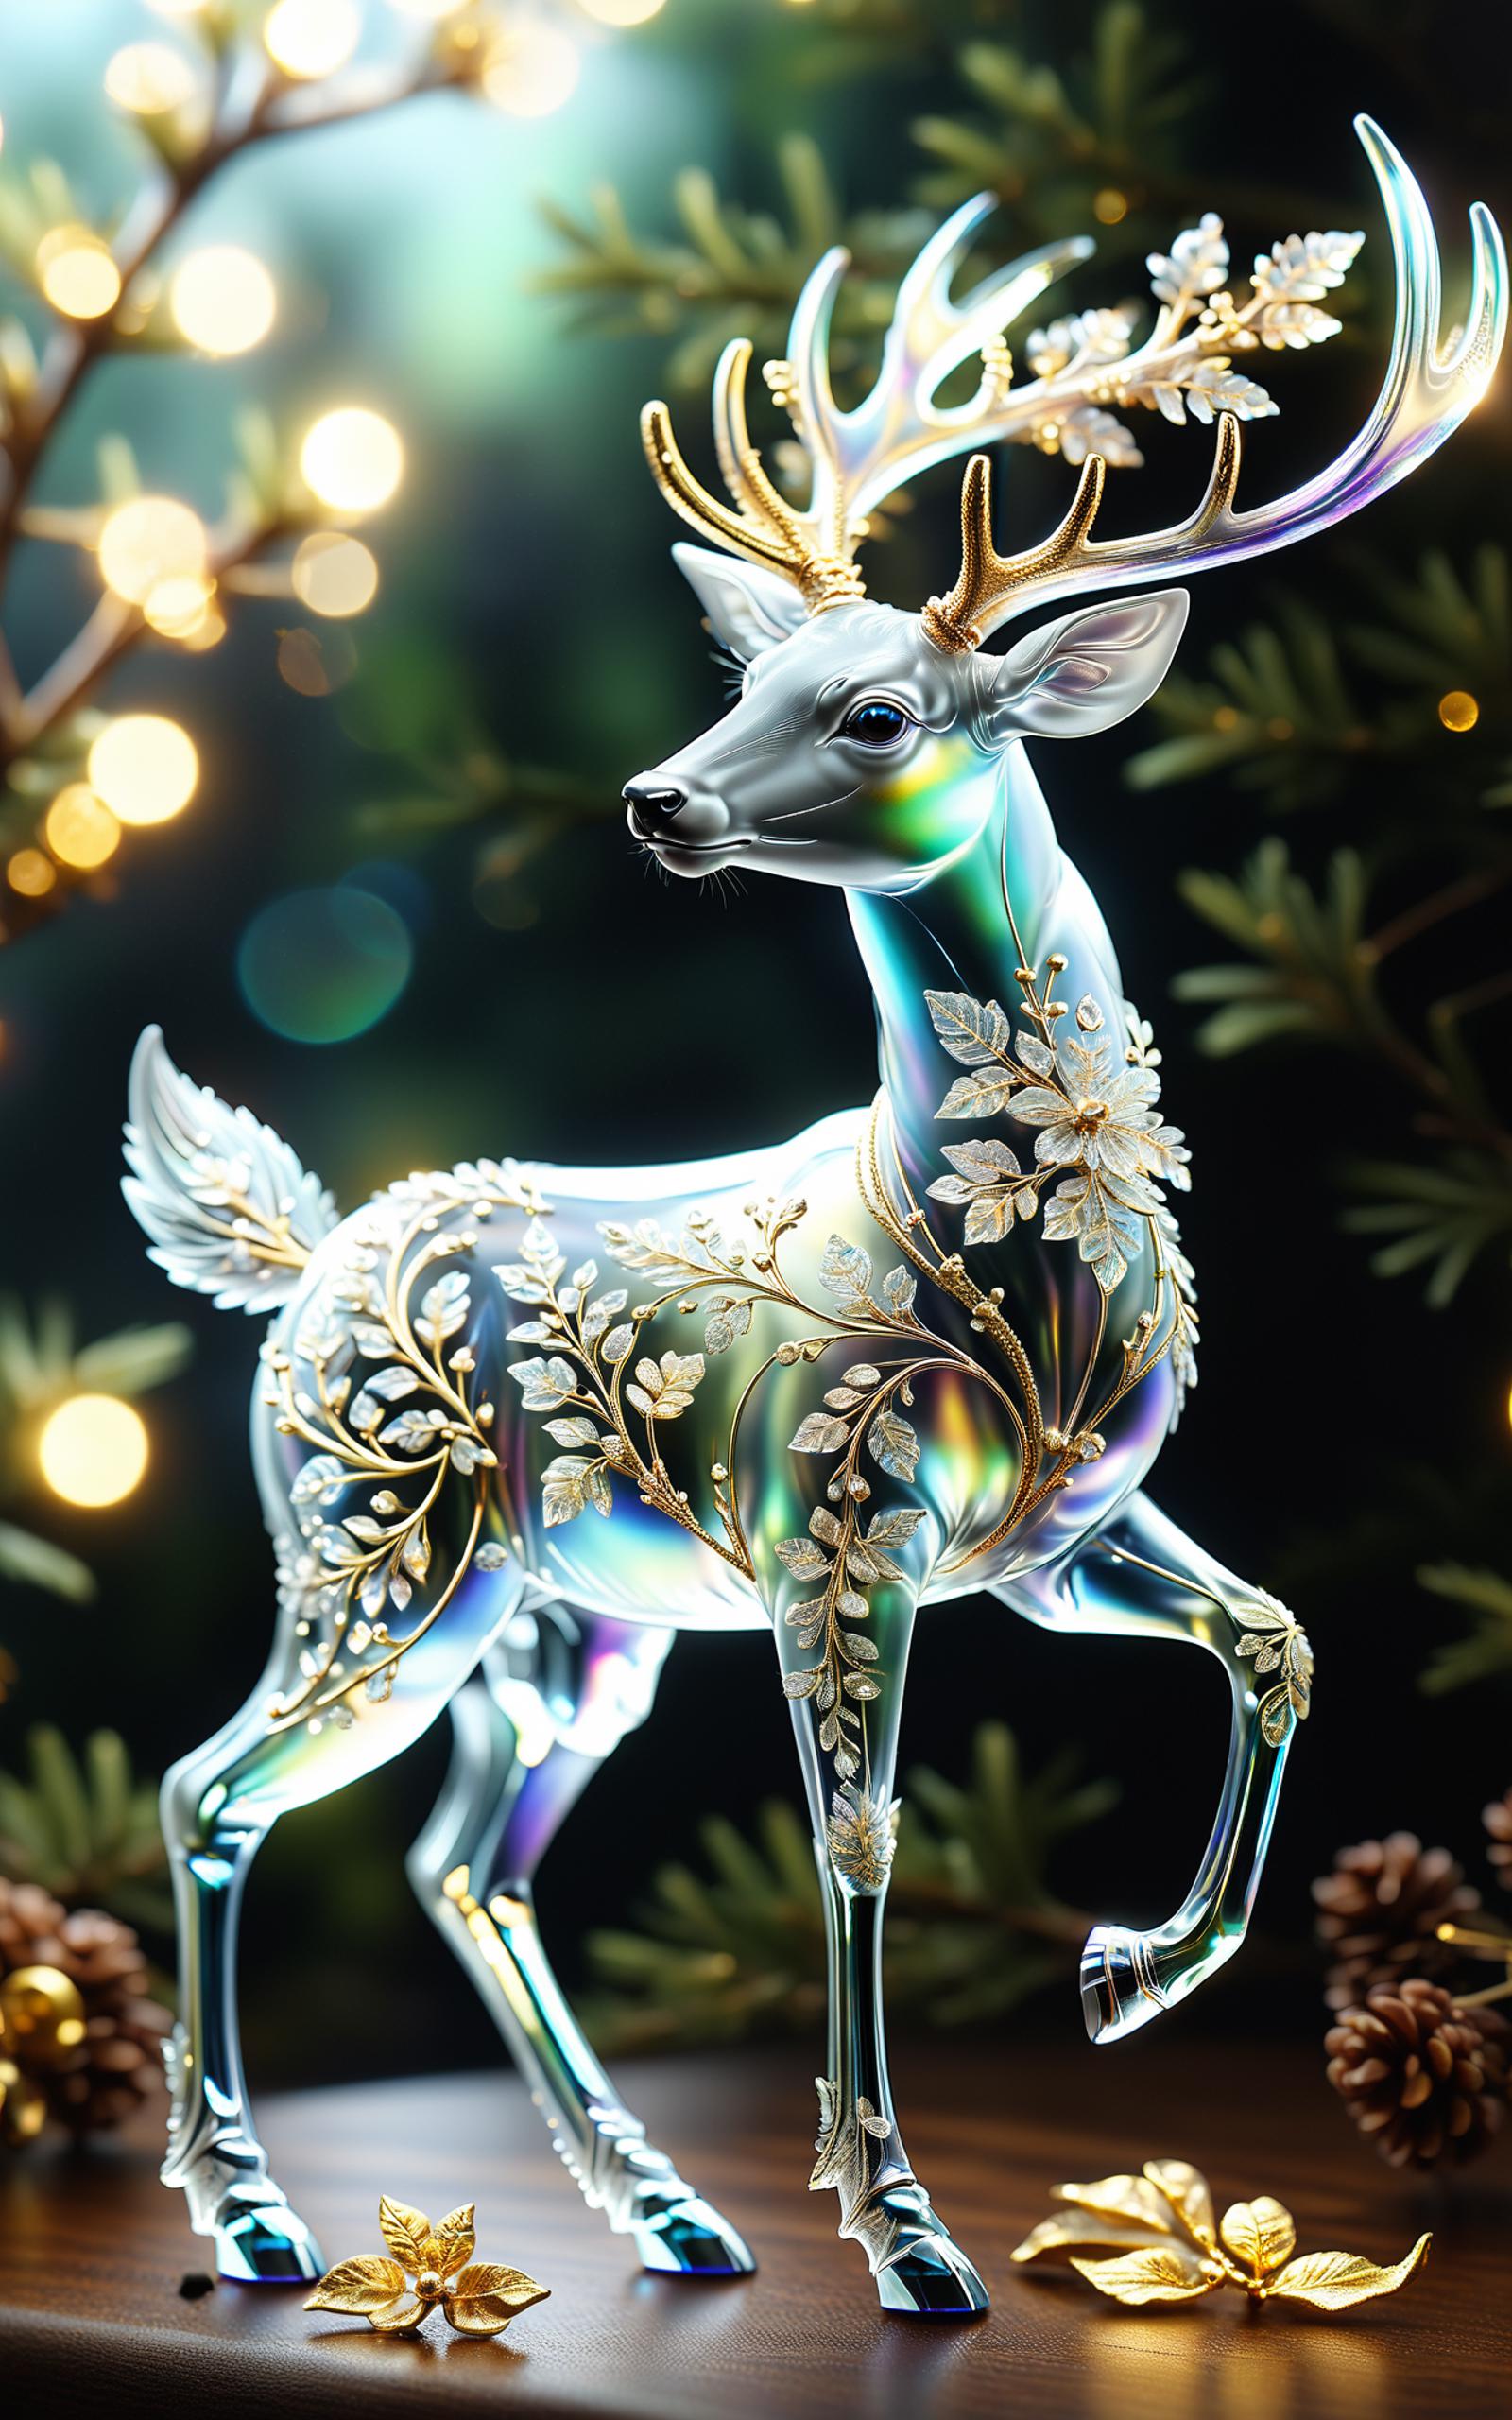 A beautifully decorated deer statue with gold and silver accents.